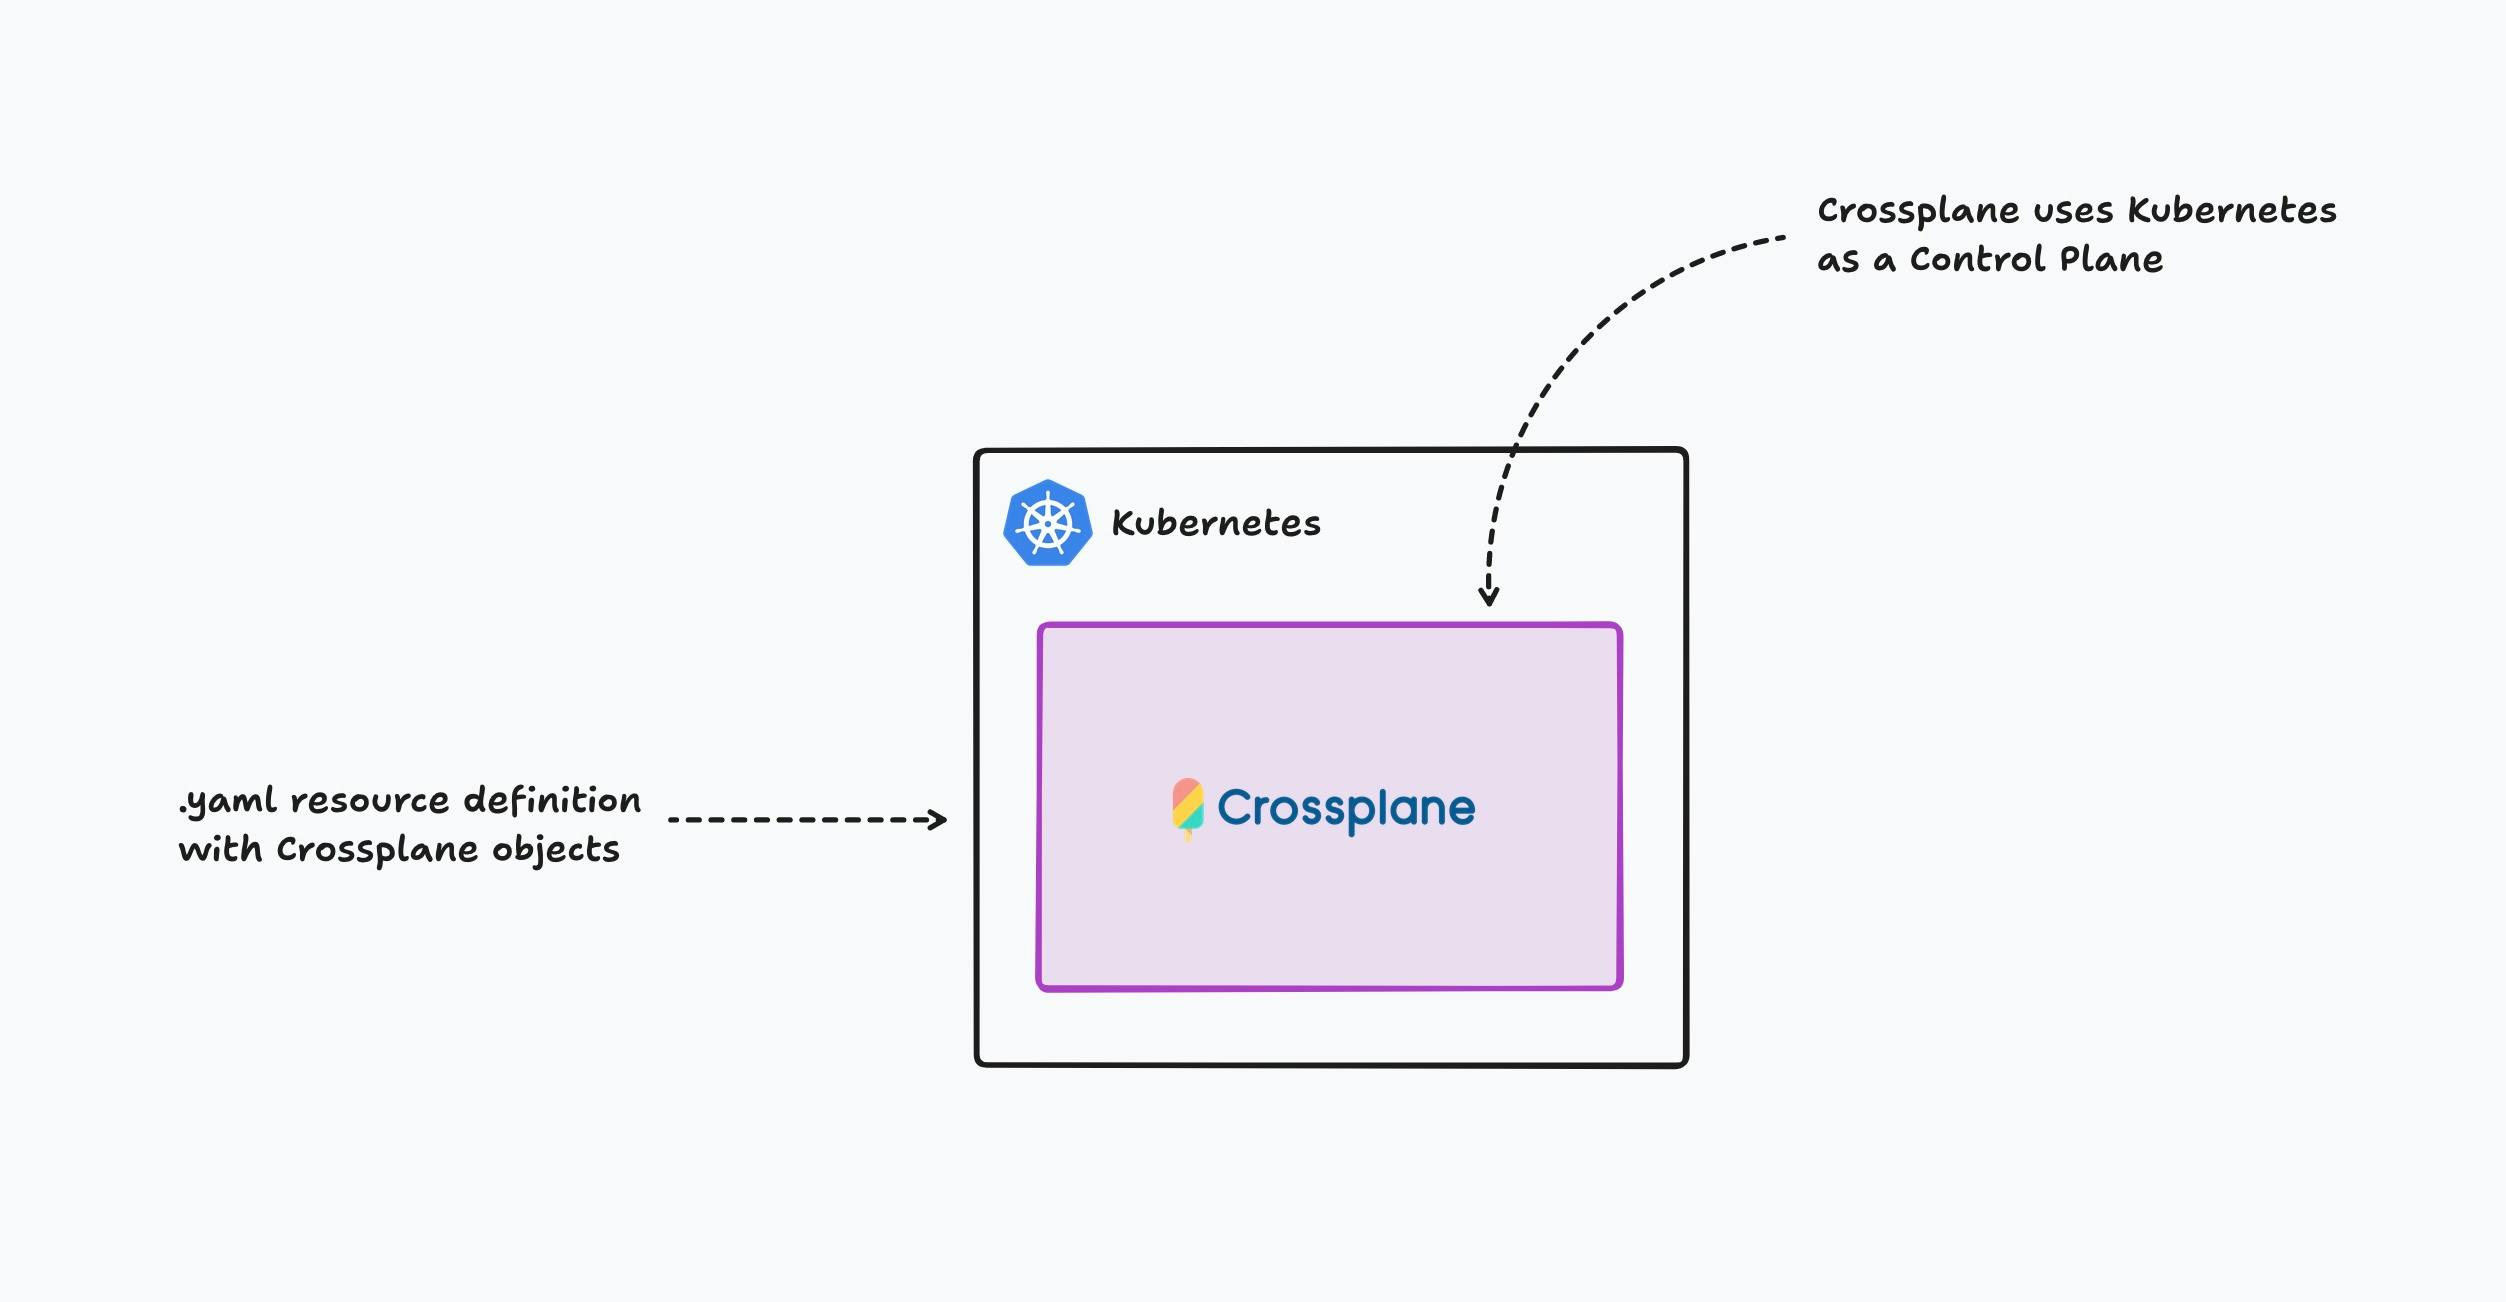 Crossplane uses Kubernetes as a Control Plane and Orchestrator - to use Crossplane you're better being familiar with Kubernetes.